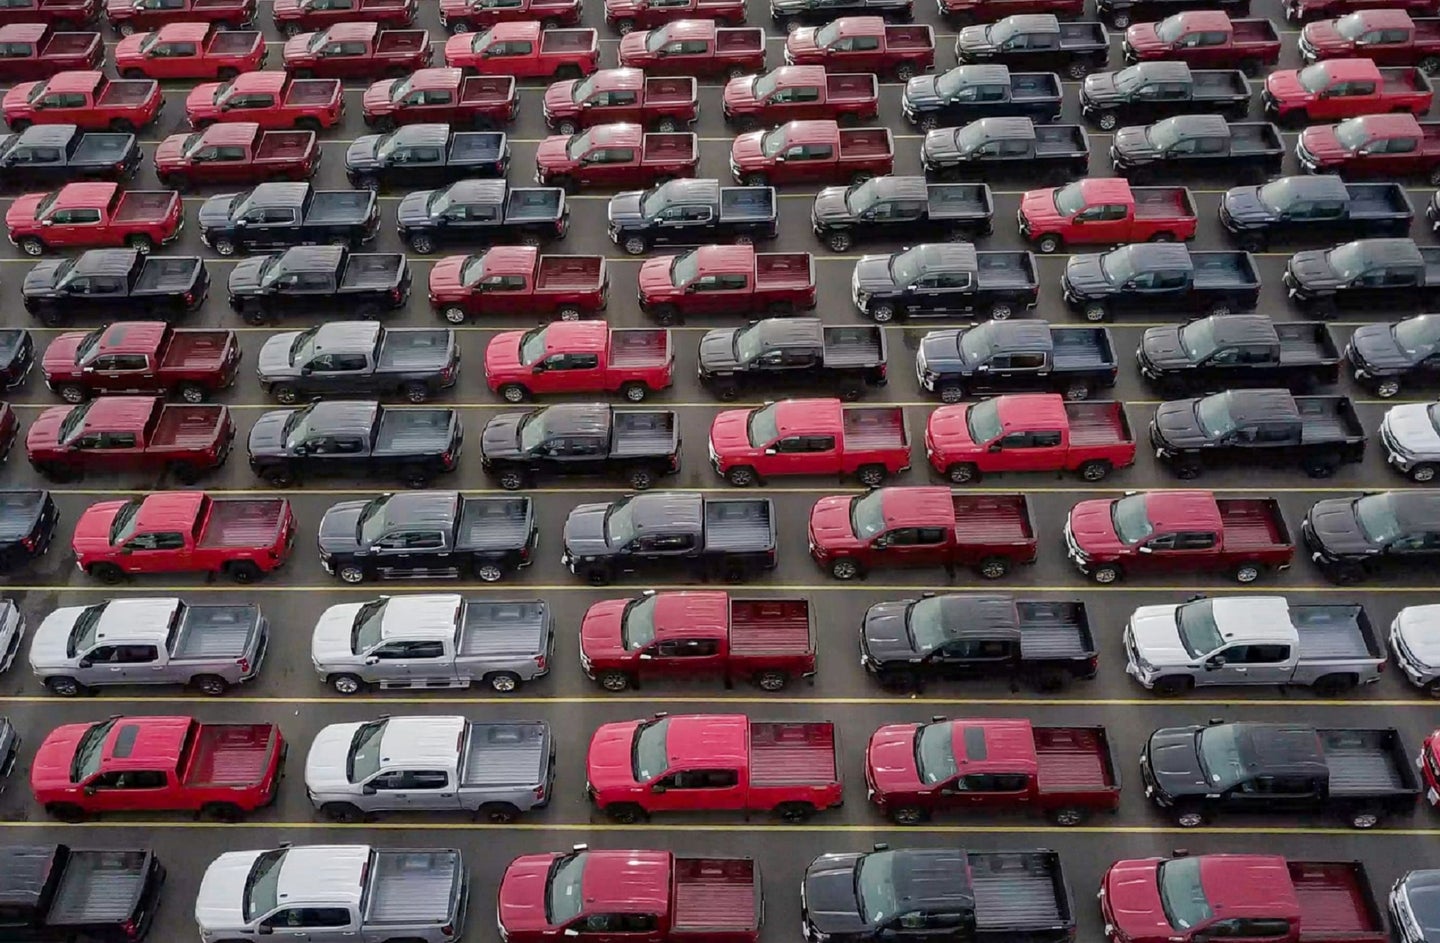 White, red, and black two-door pick-up trucks lined up in rows during the chip shortage